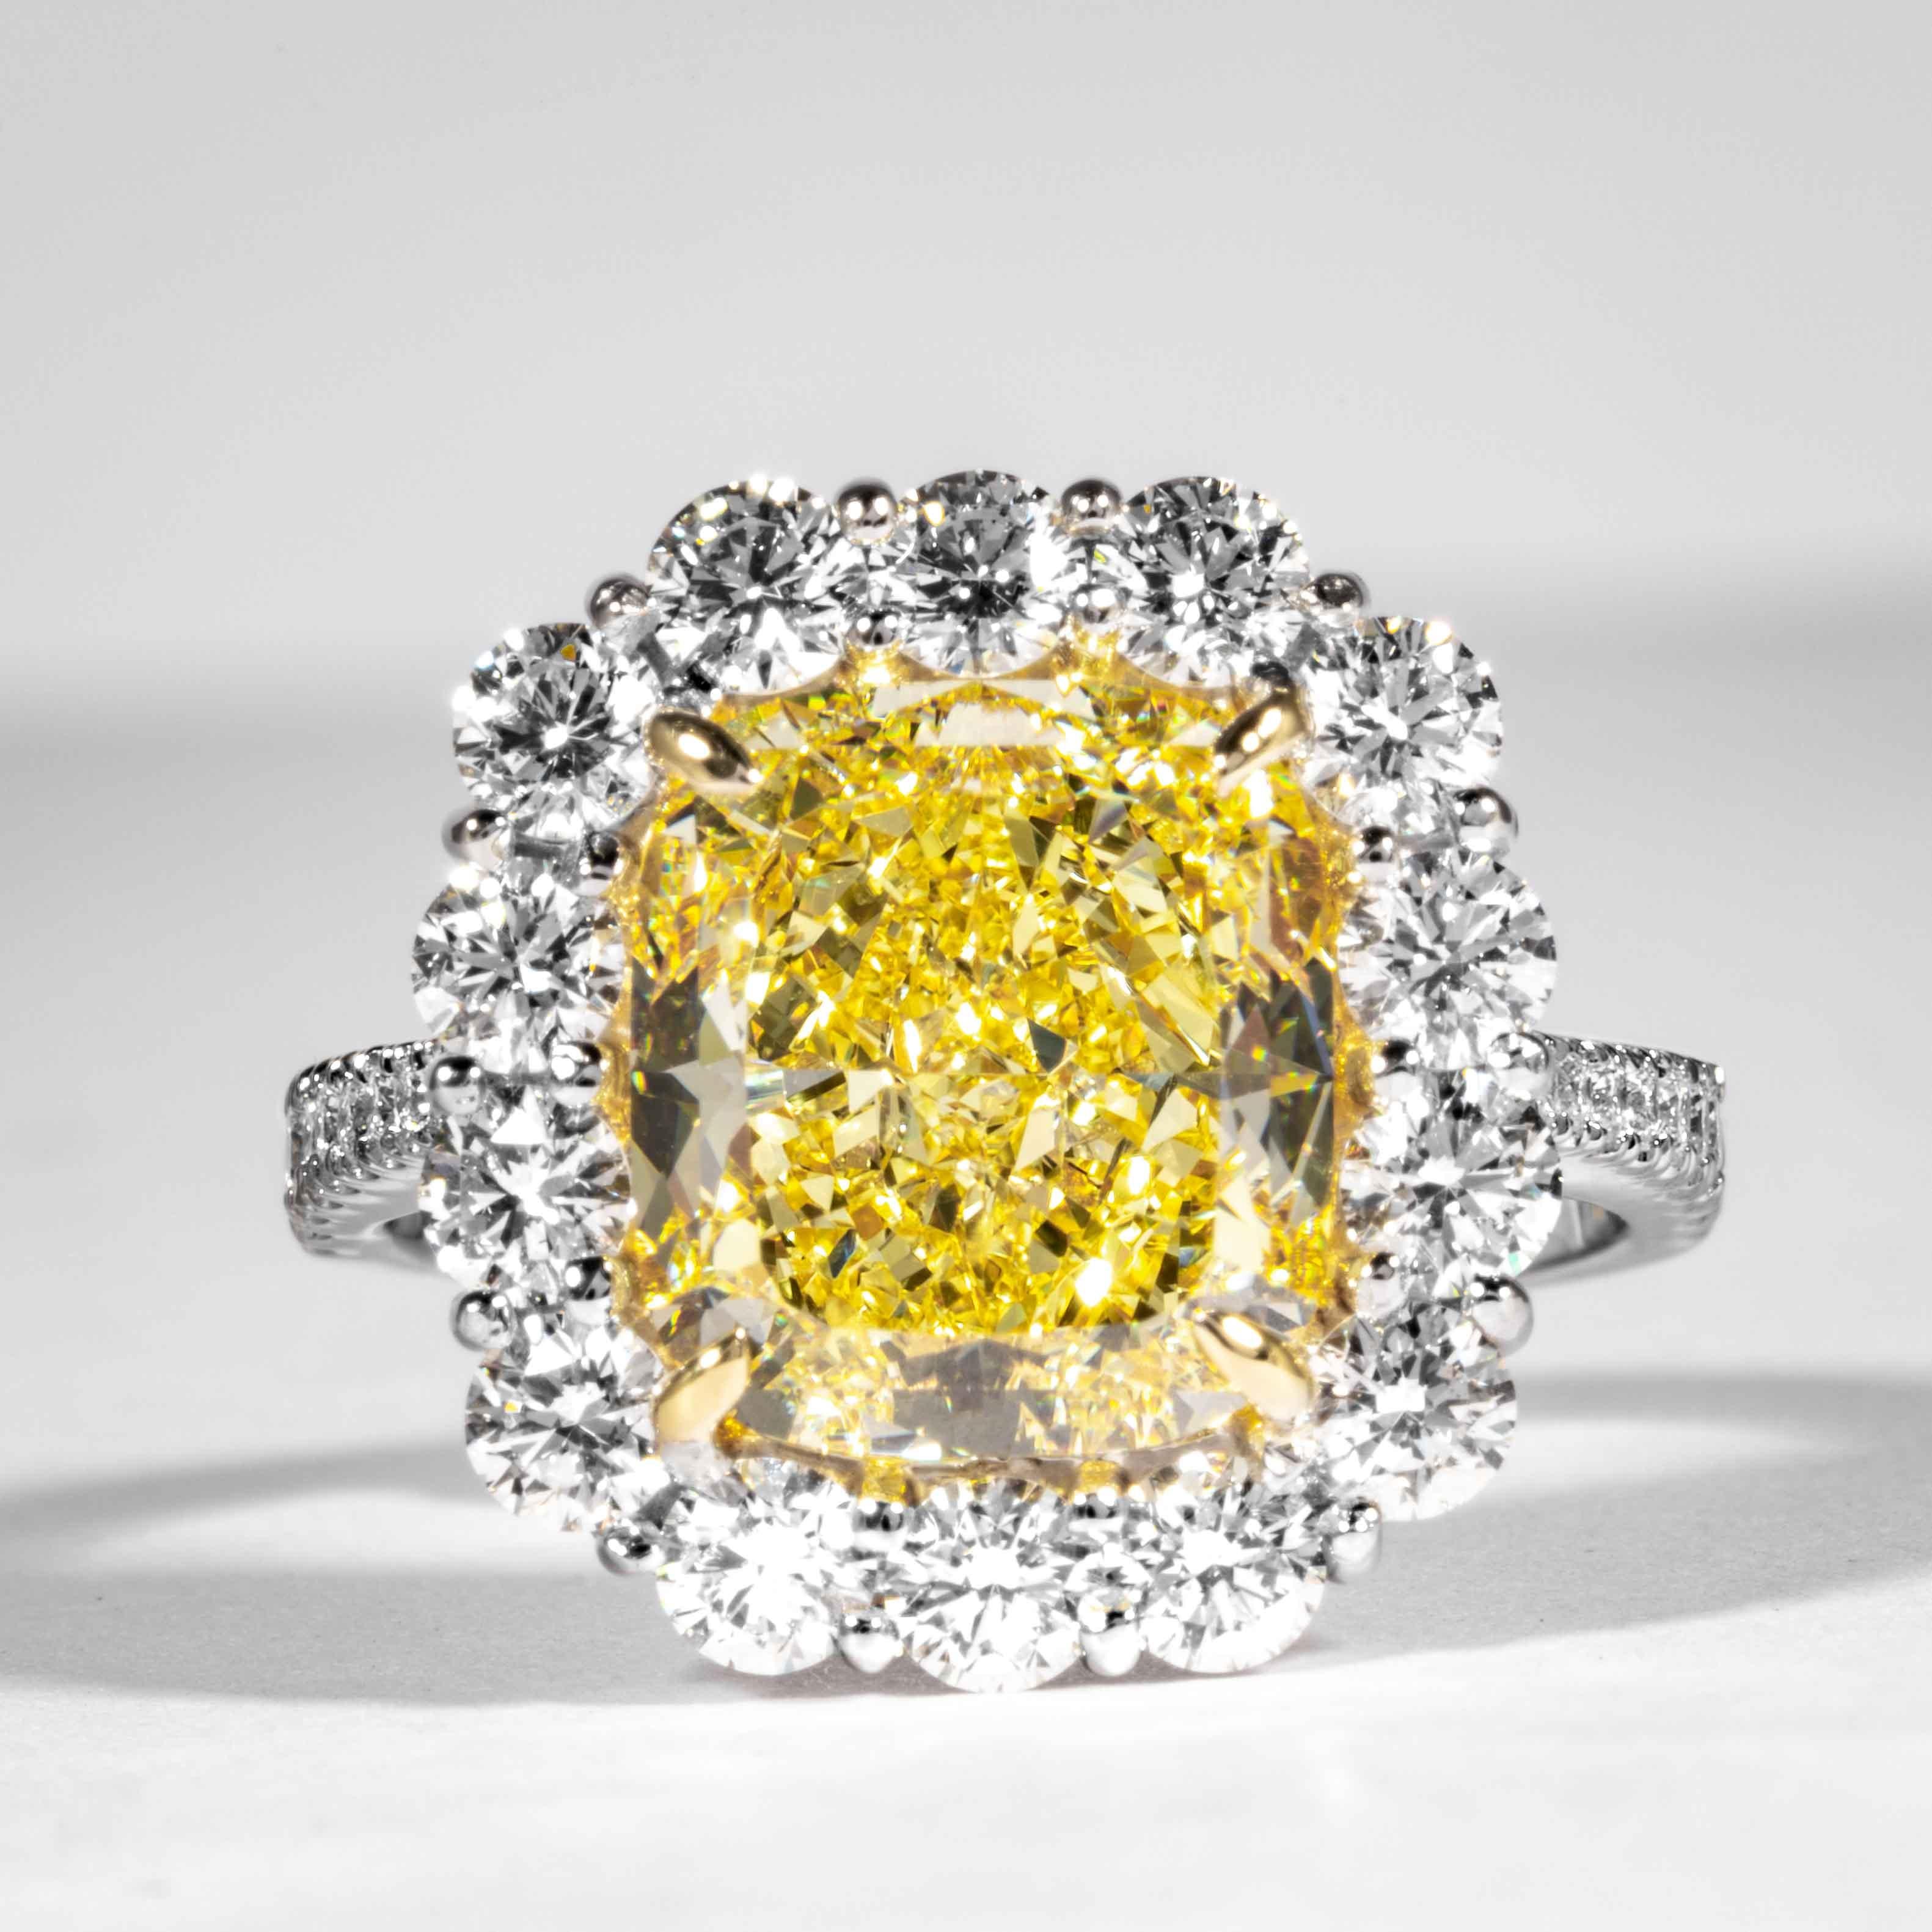 This fancy intense yellow cushion cut diamond is offered by Shreve, Crump & Low. This fancy intense yellow cushion cut diamond is custom set in a handcrafted Shreve, Crump & Low platinum and 18 karat yellow gold diamond cluster ring consisting of 1